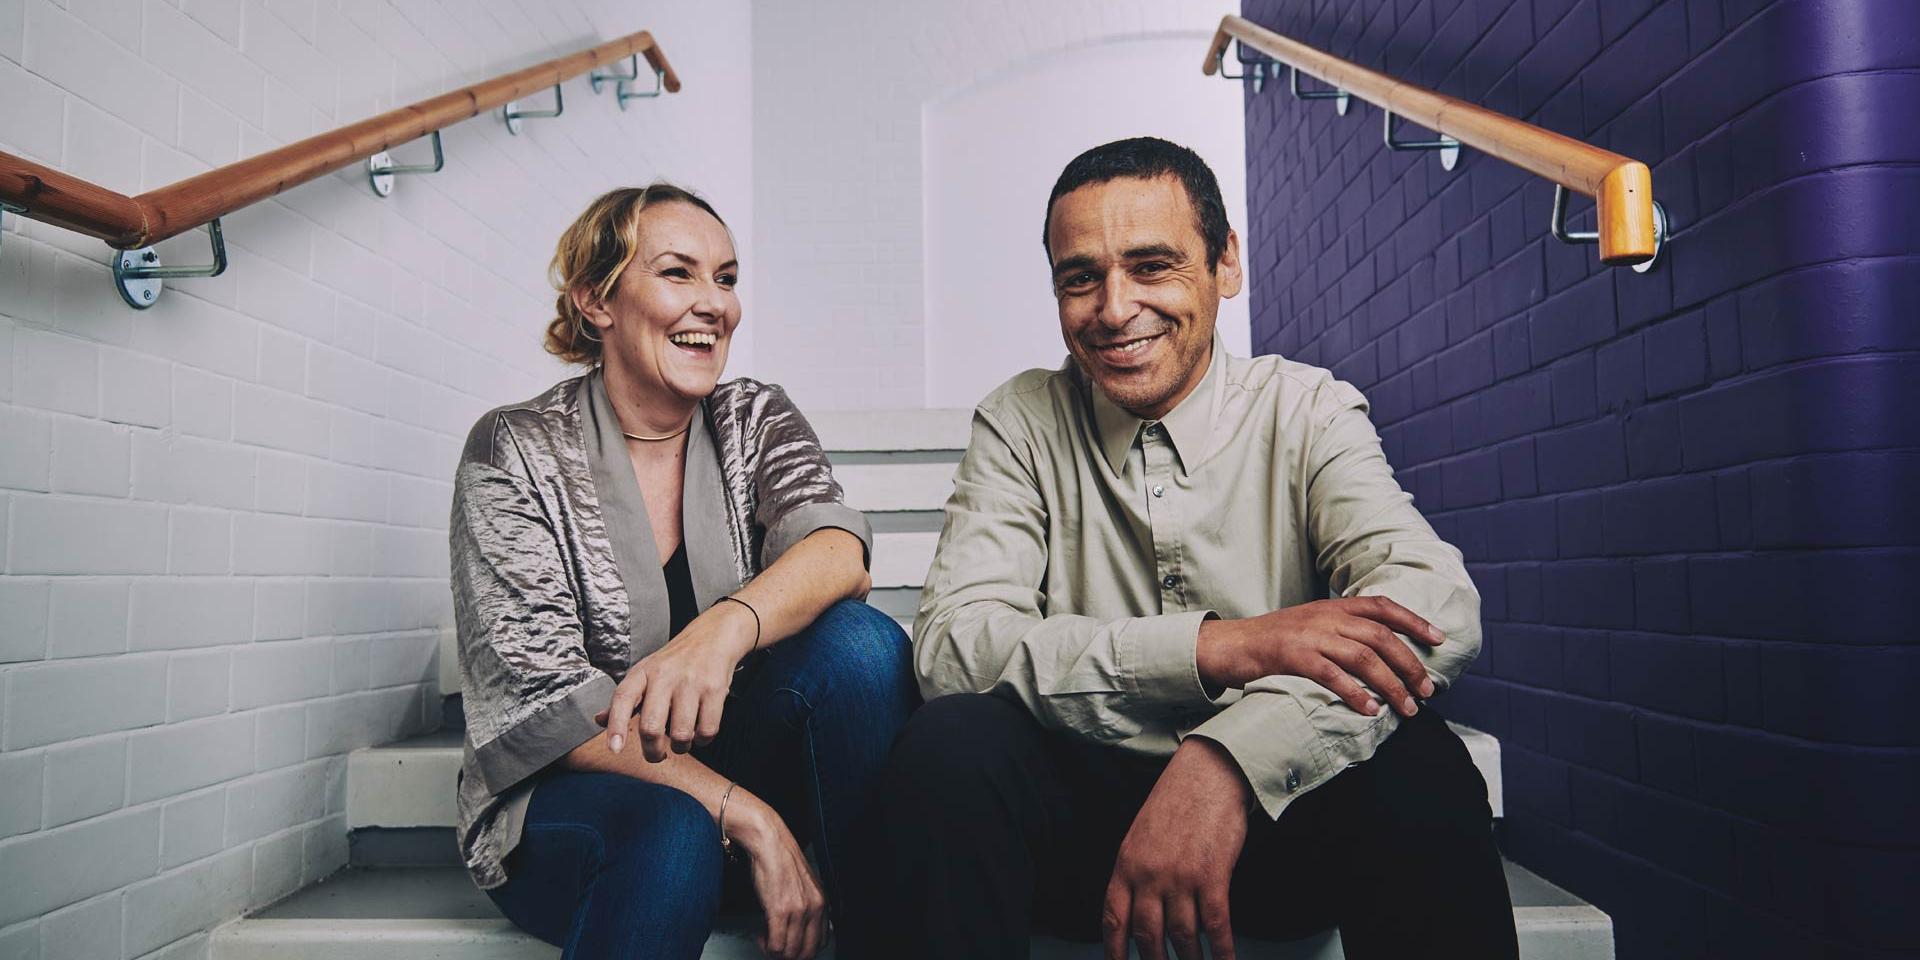 a woman and a man sitting on the stairs laughing